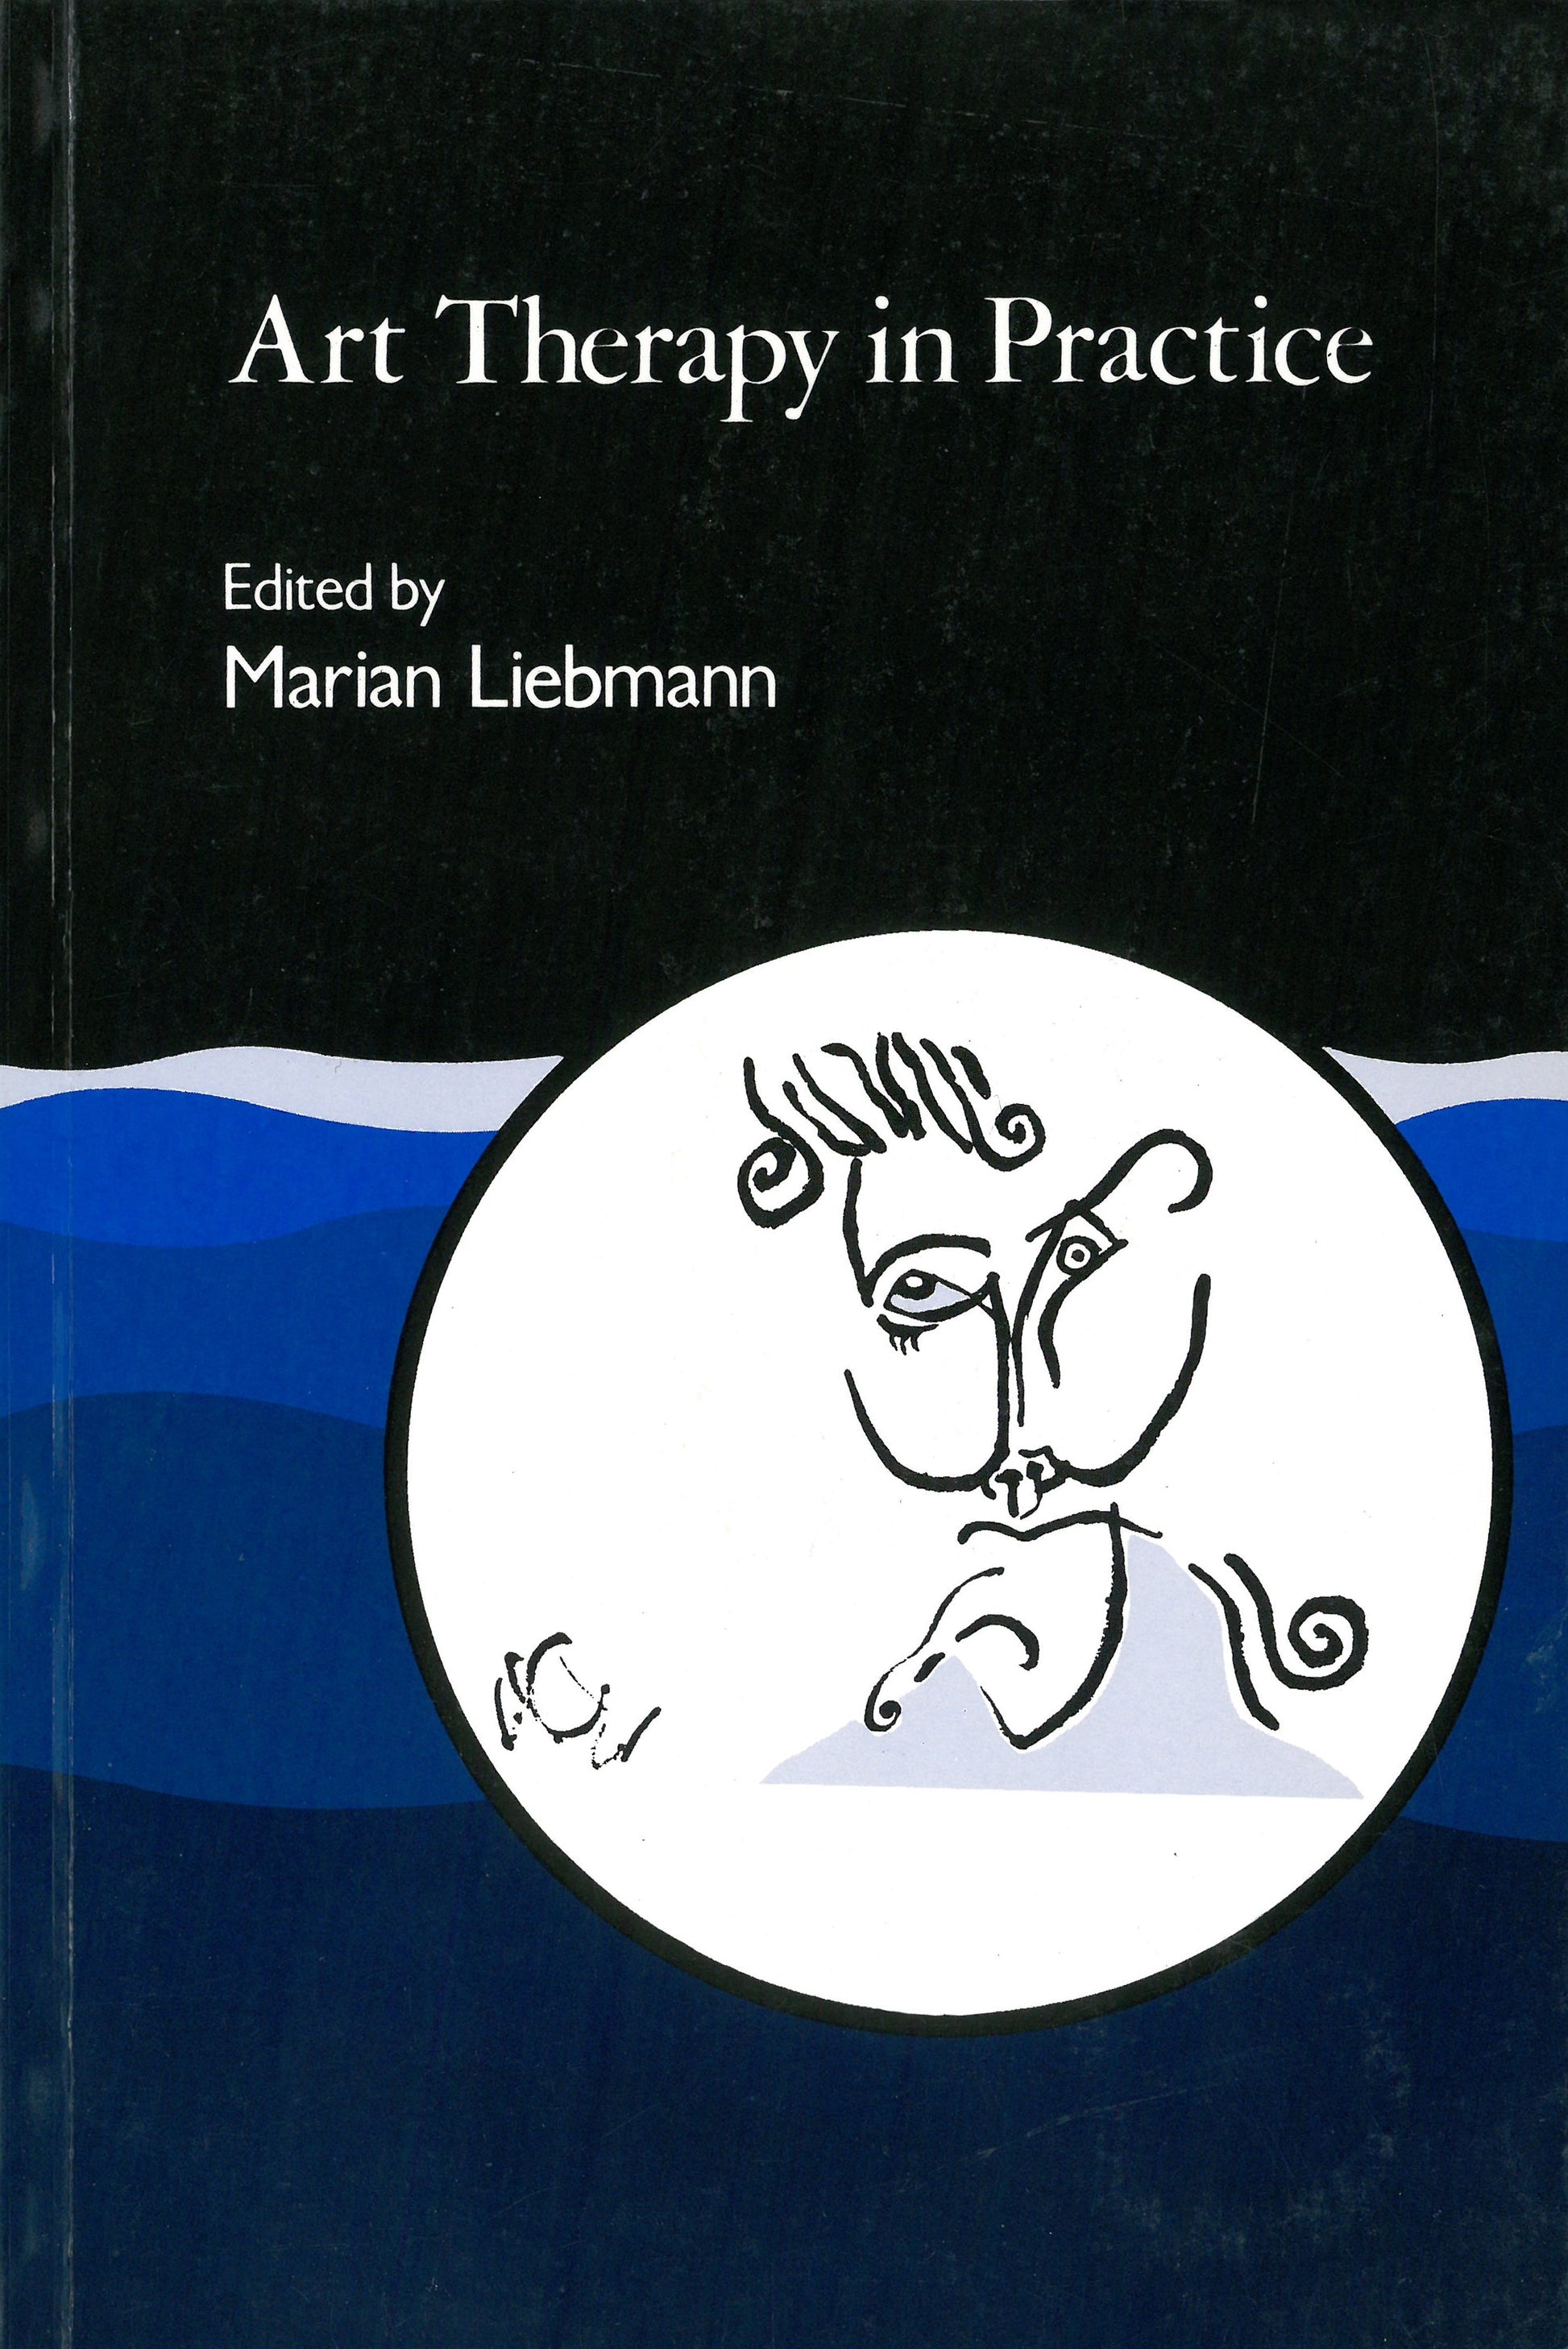 Art Therapy in Practice by No Author Listed, Marian Liebmann